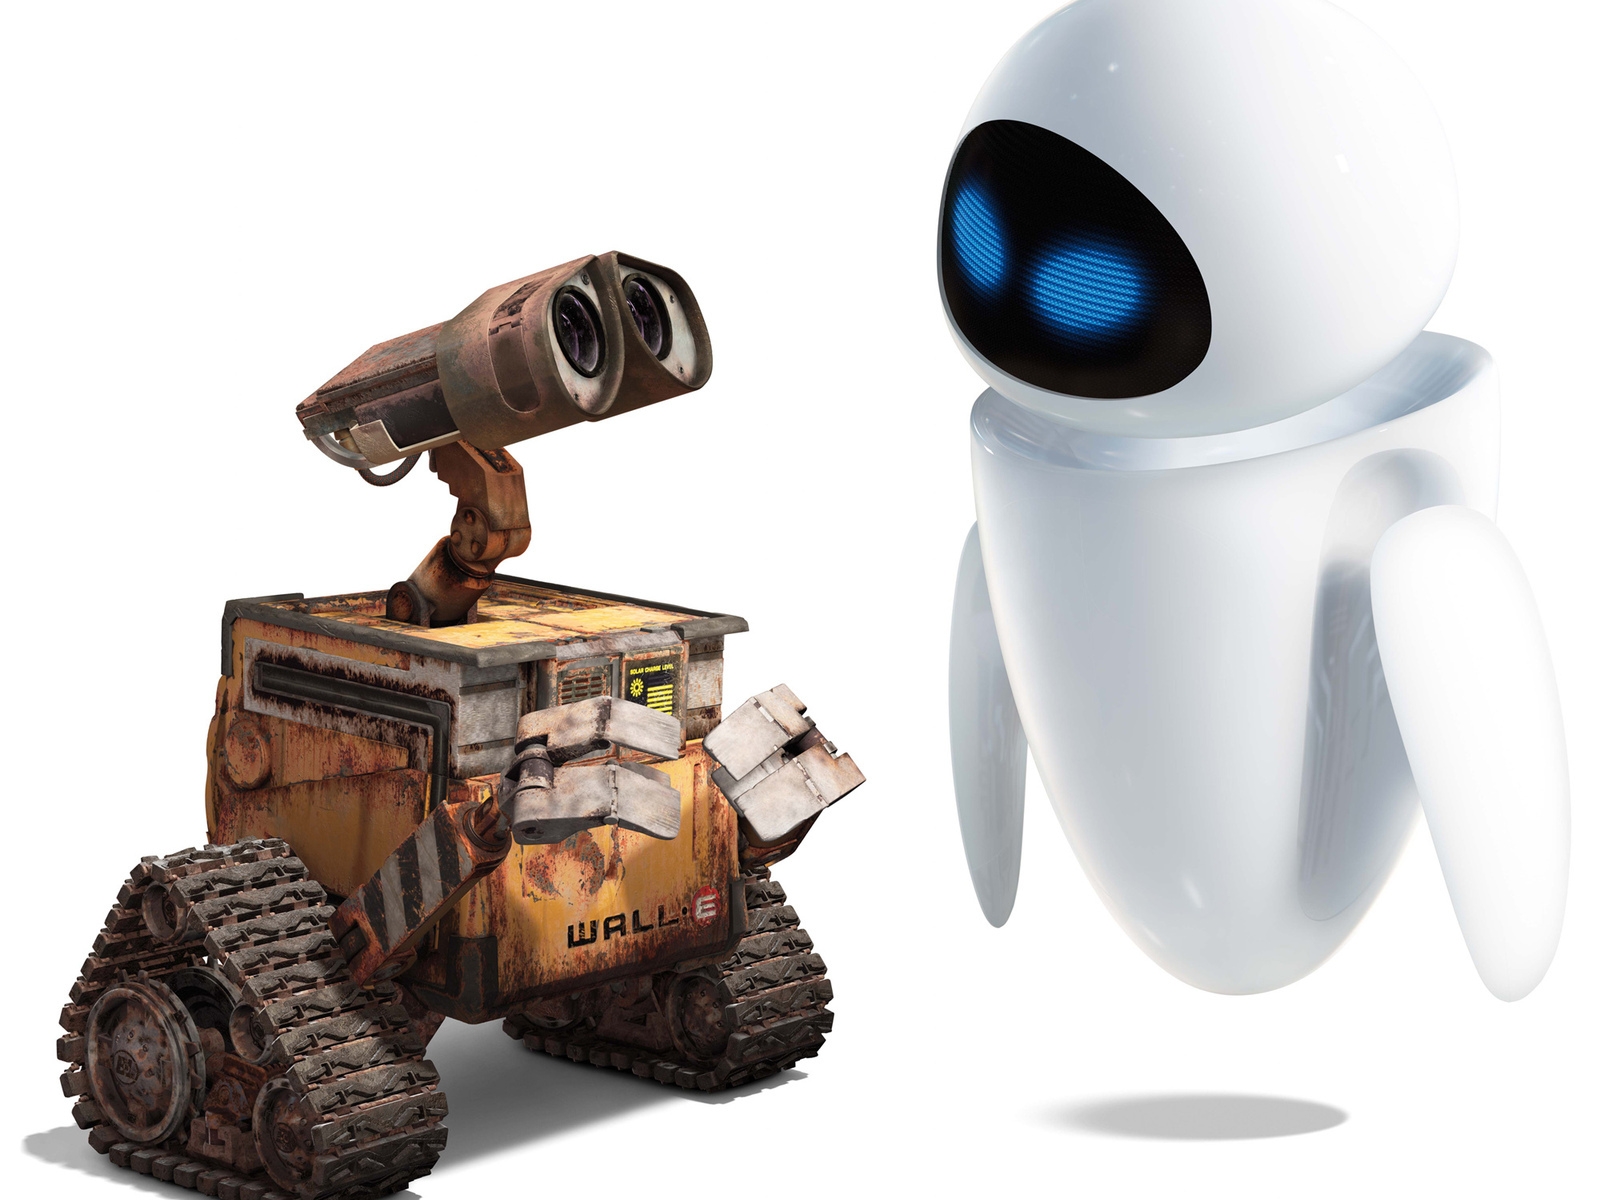 Walle Robots for 1600 x 1200 resolution